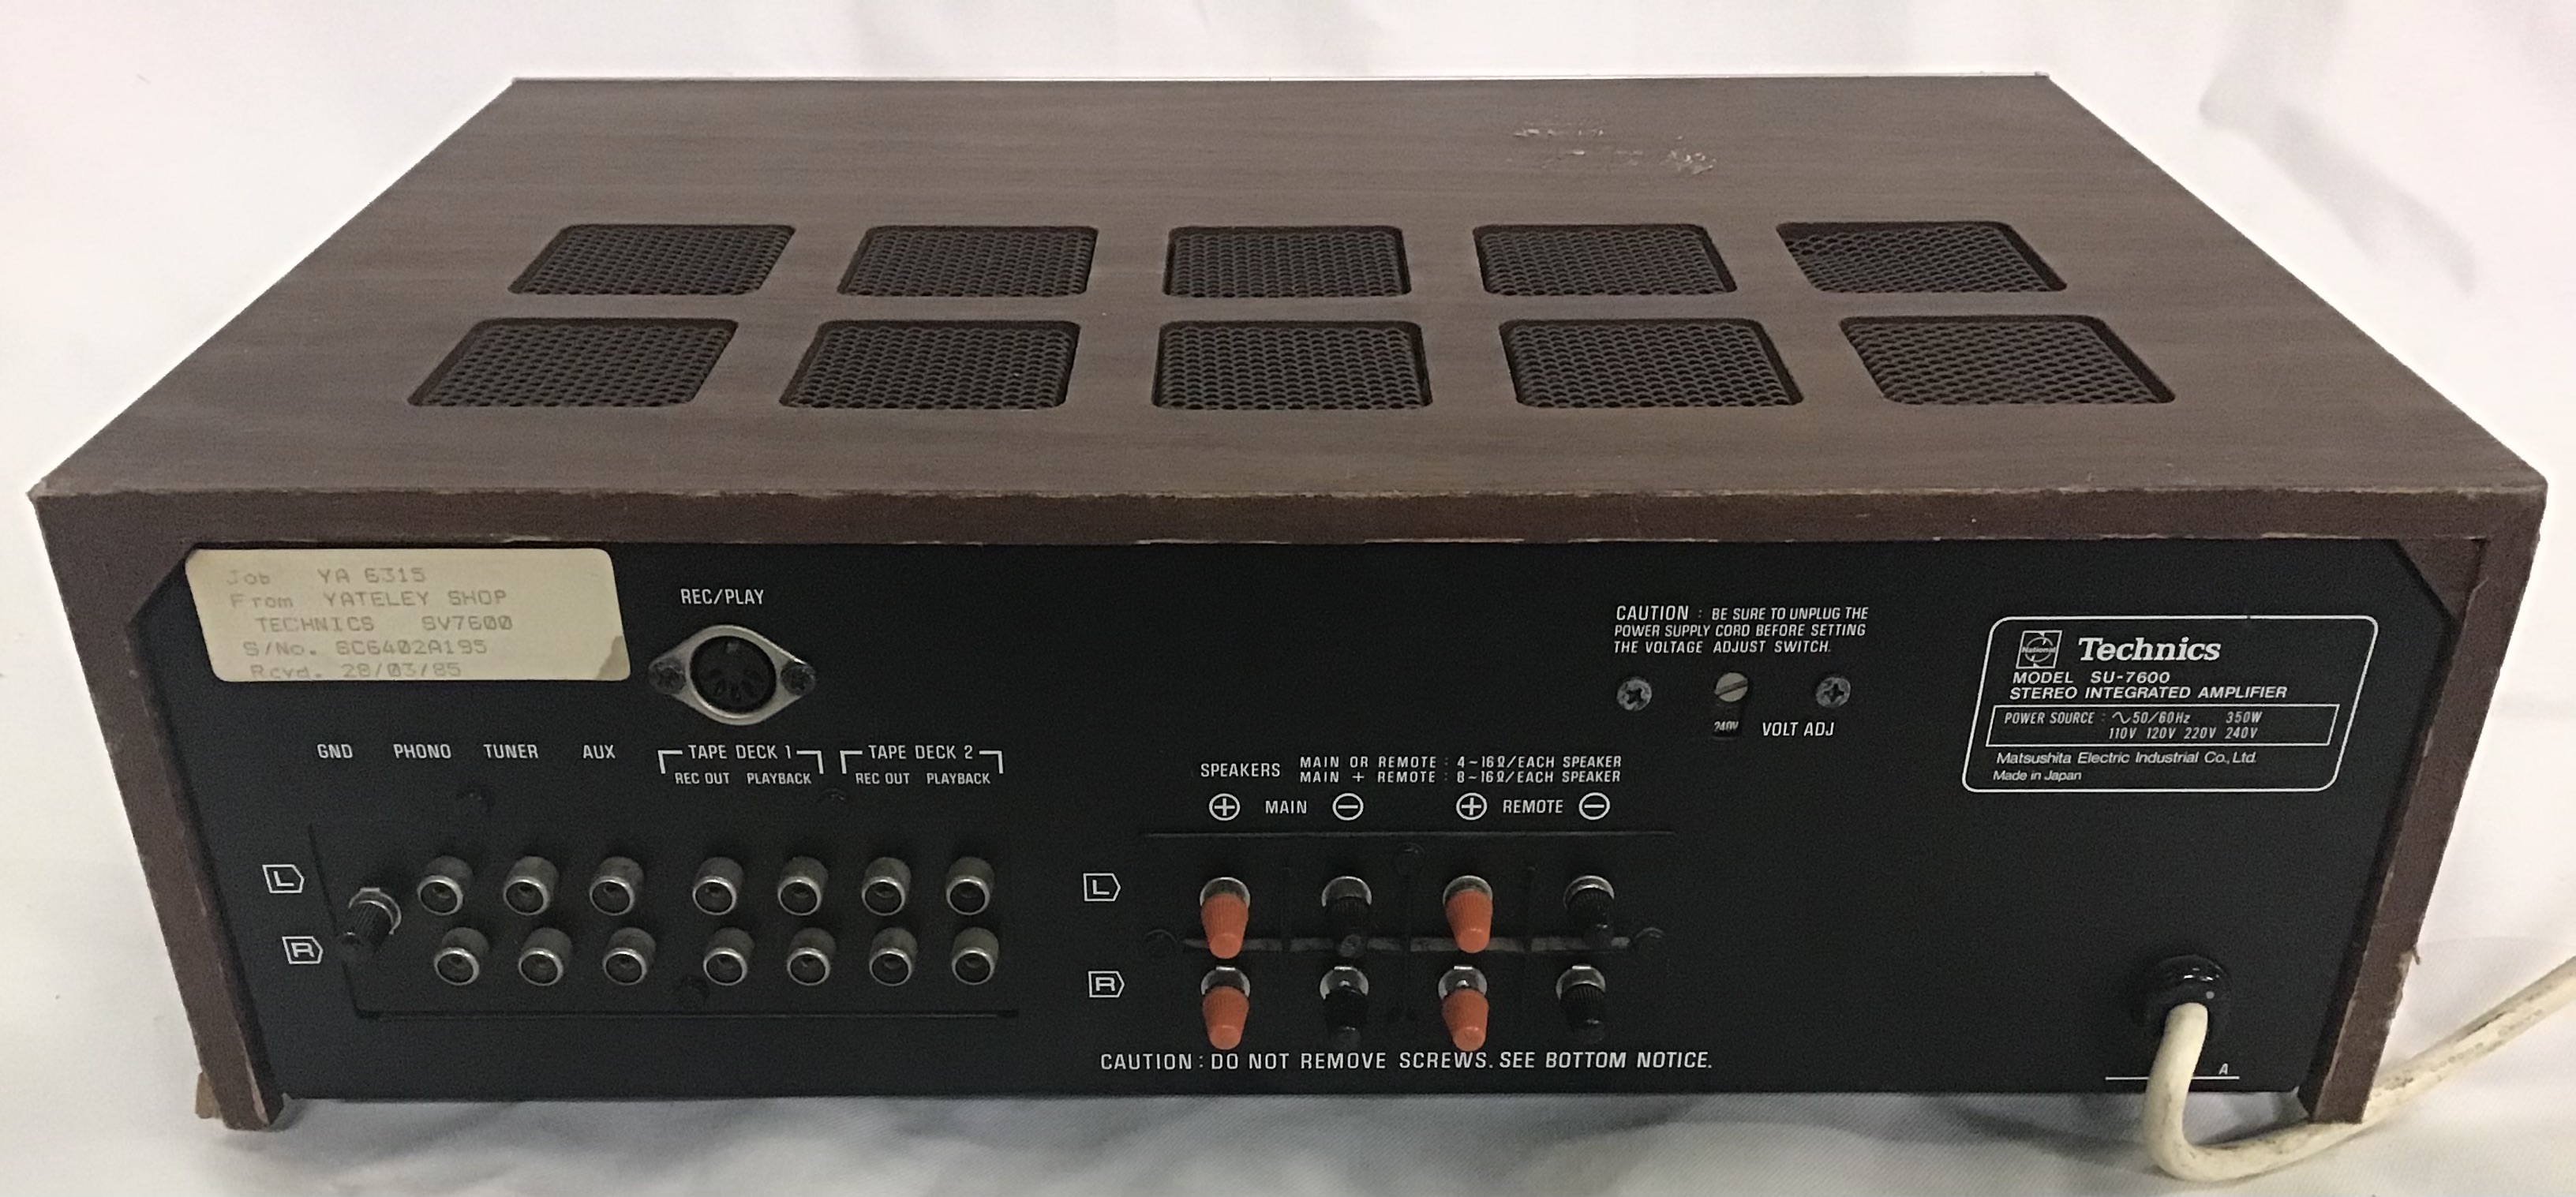 TECHNICS STEREO INTERGRATED AMPLIFIER. - Image 2 of 3